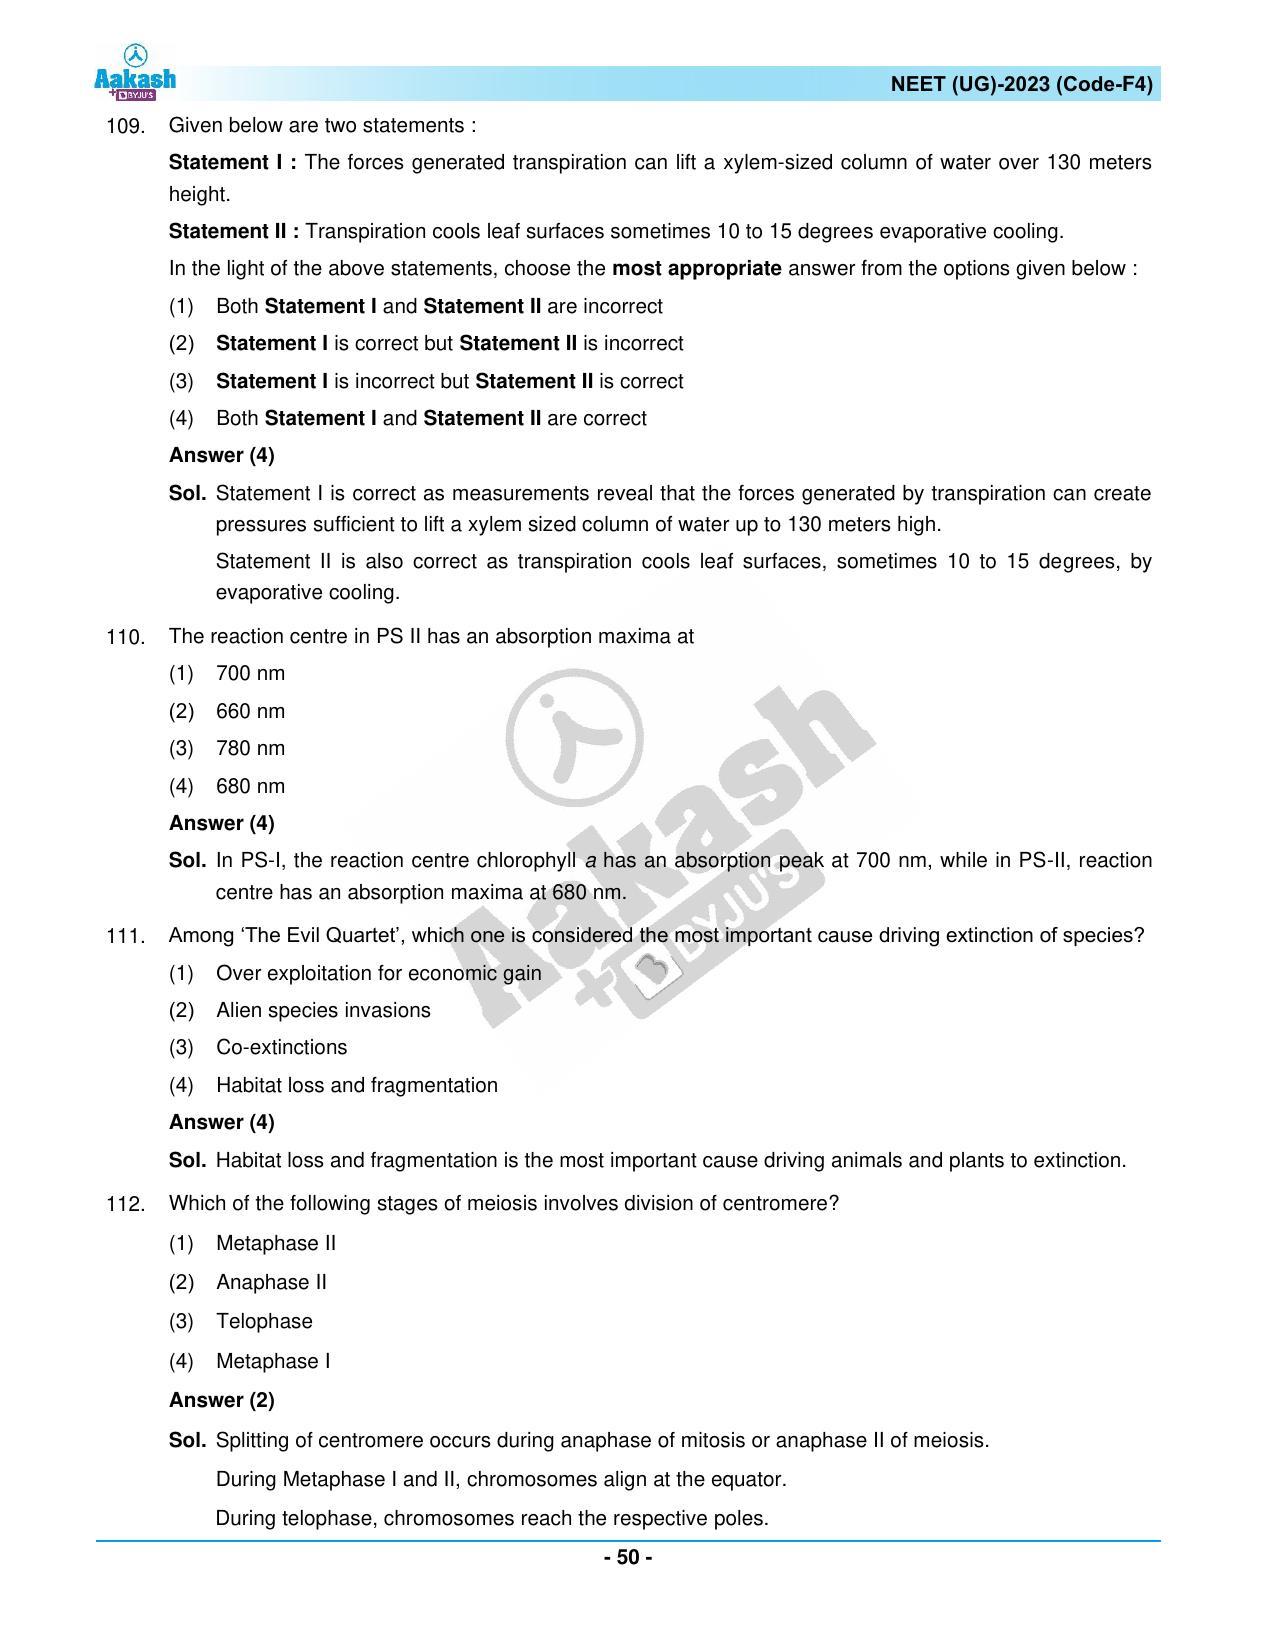 NEET 2023 Question Paper F4 - Page 50